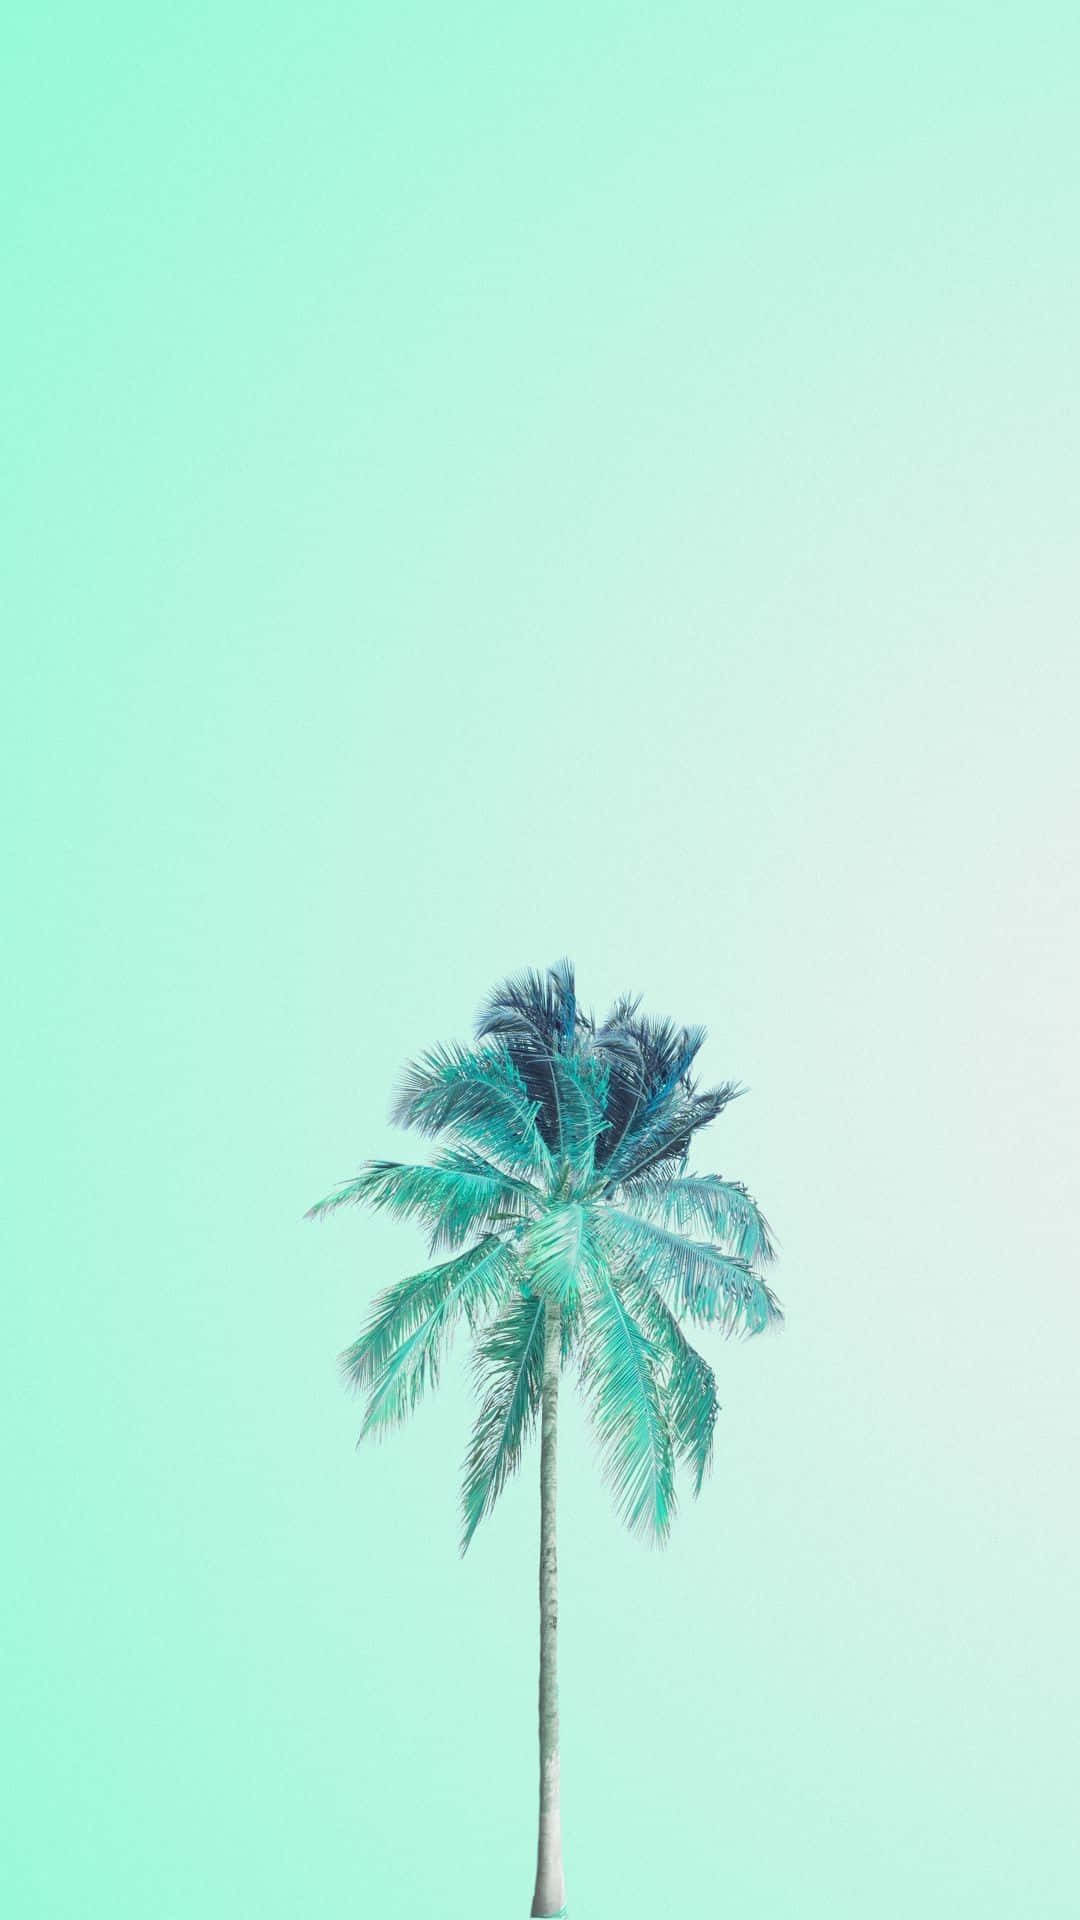 A Palm Tree On A Green Background